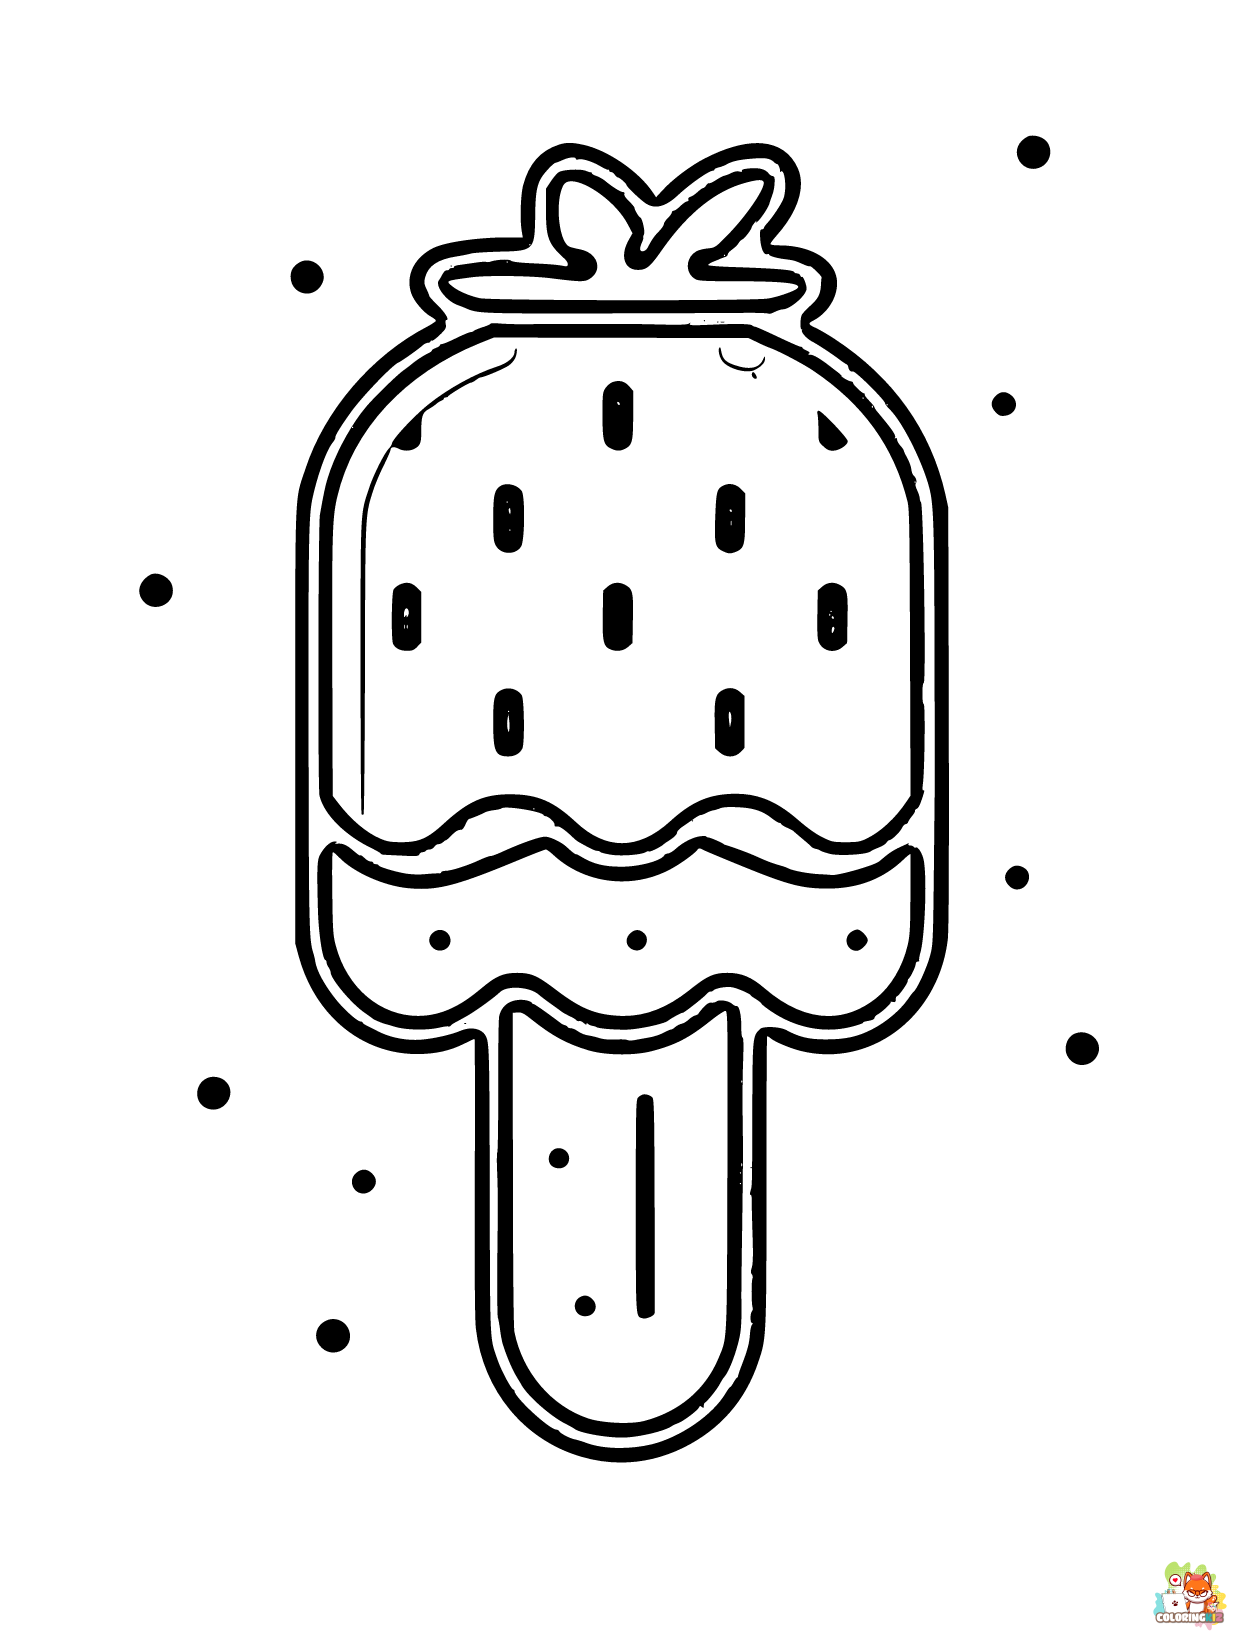 Popsicle coloring pages to print